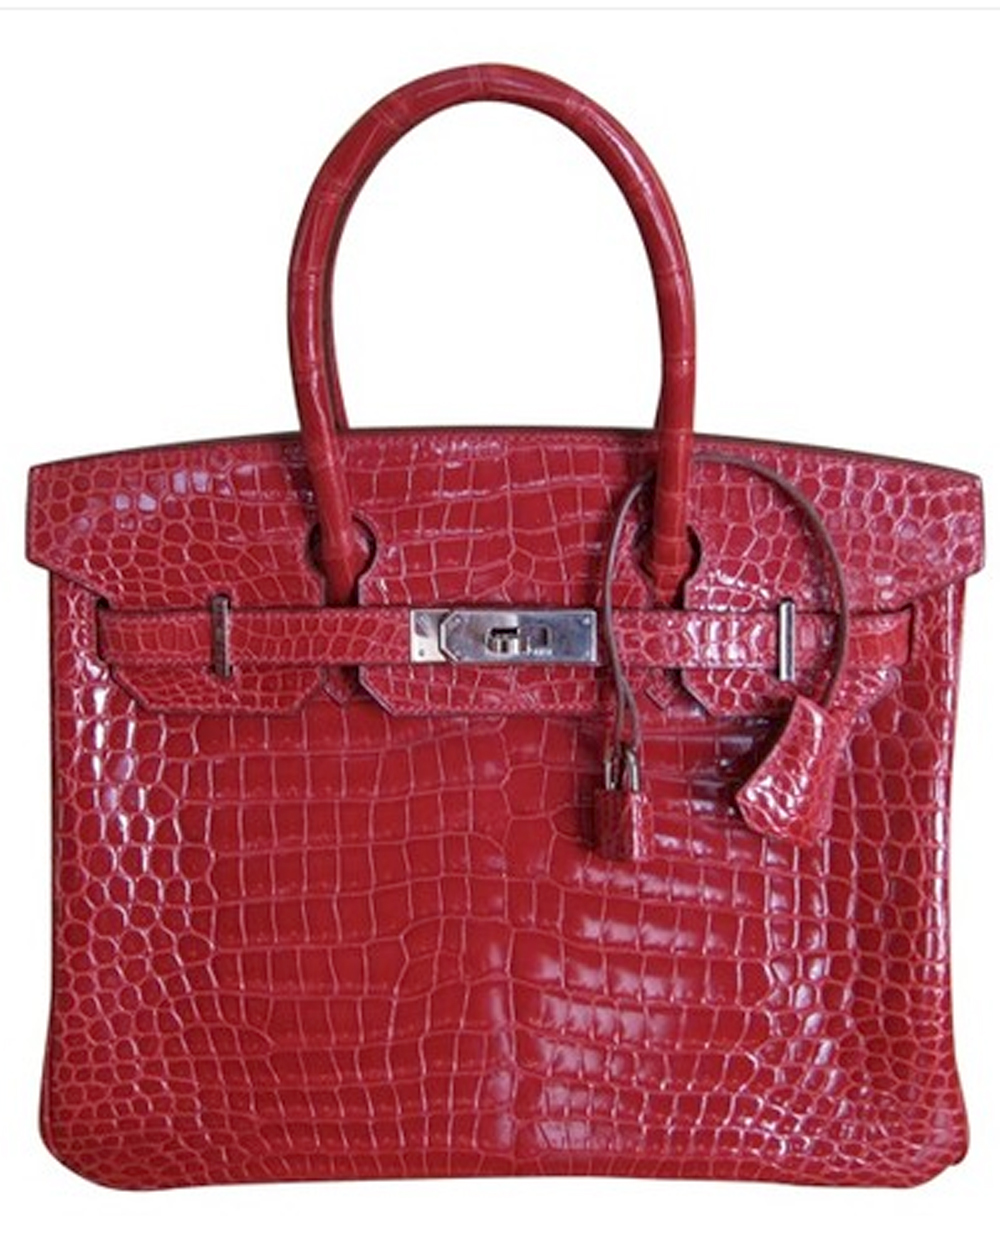 The Birkin Bag That Returns Every Year to Haunt Us - Racked